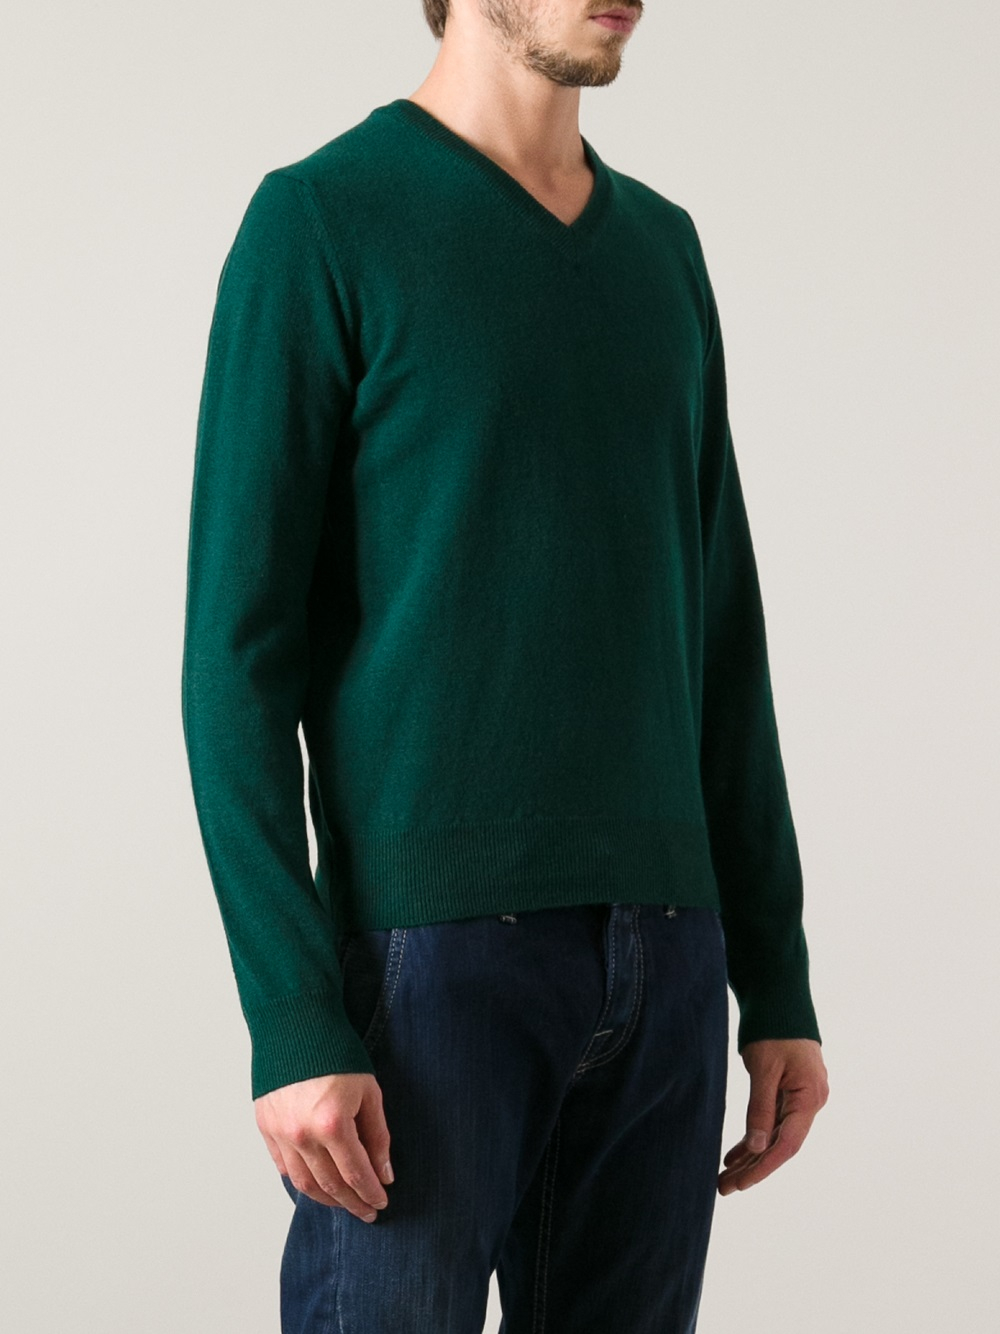 Lyst - Moncler Classic Sweater in Green for Men